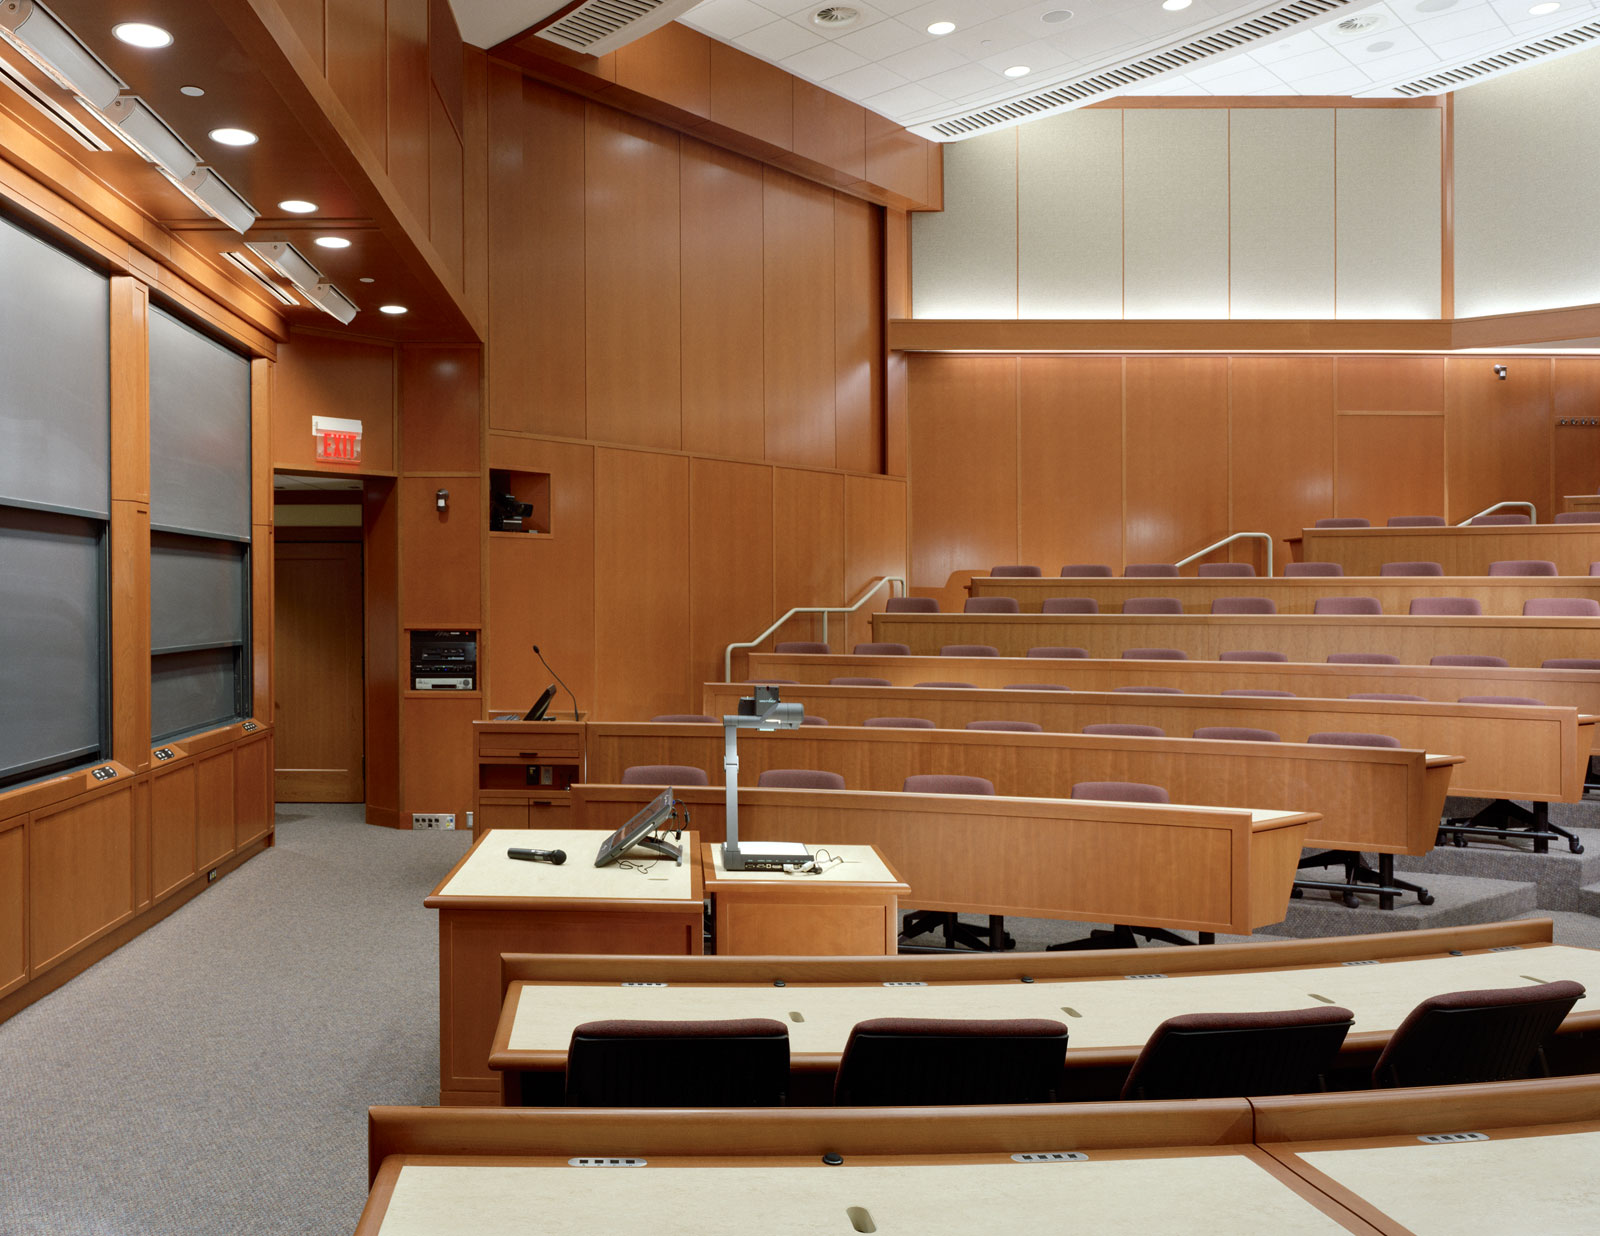 A lecture hall at Aldrich Hall. MRW built the permanent tables for the hall.